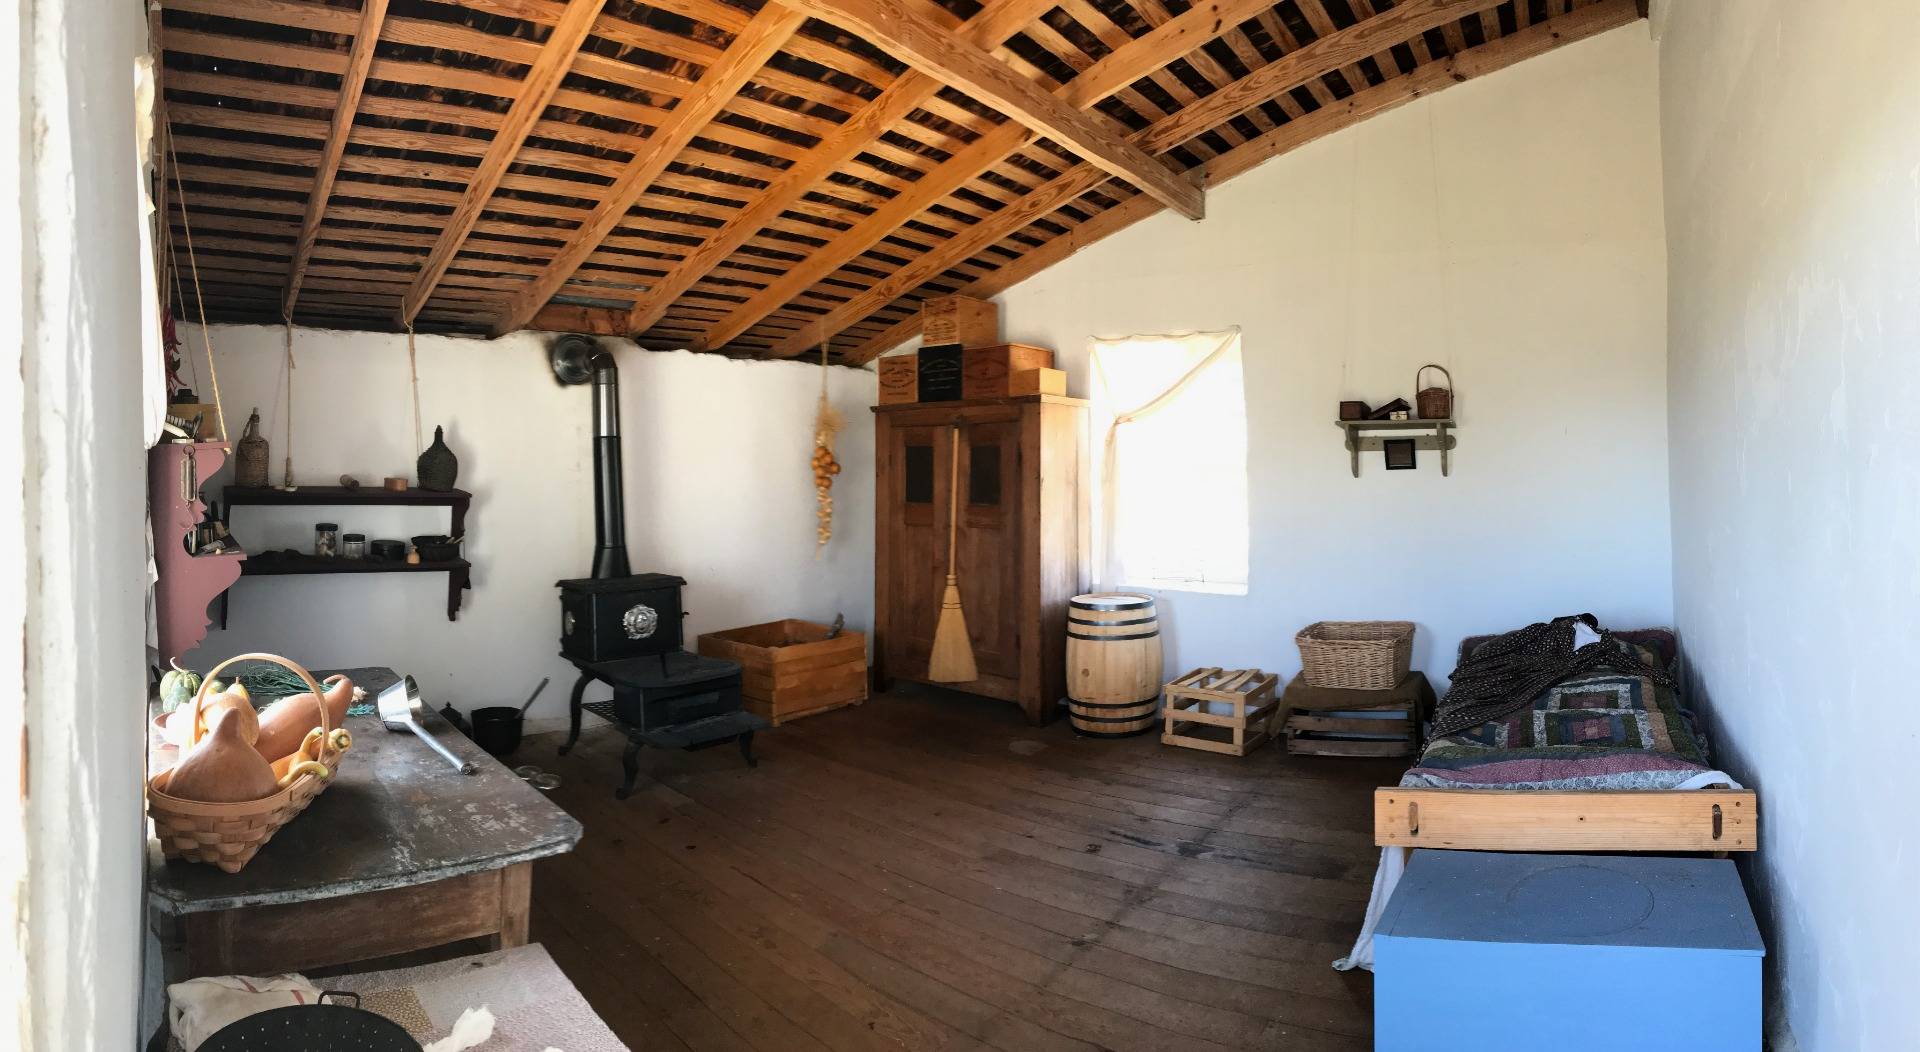 Married officer’s kitchen and servant quarters